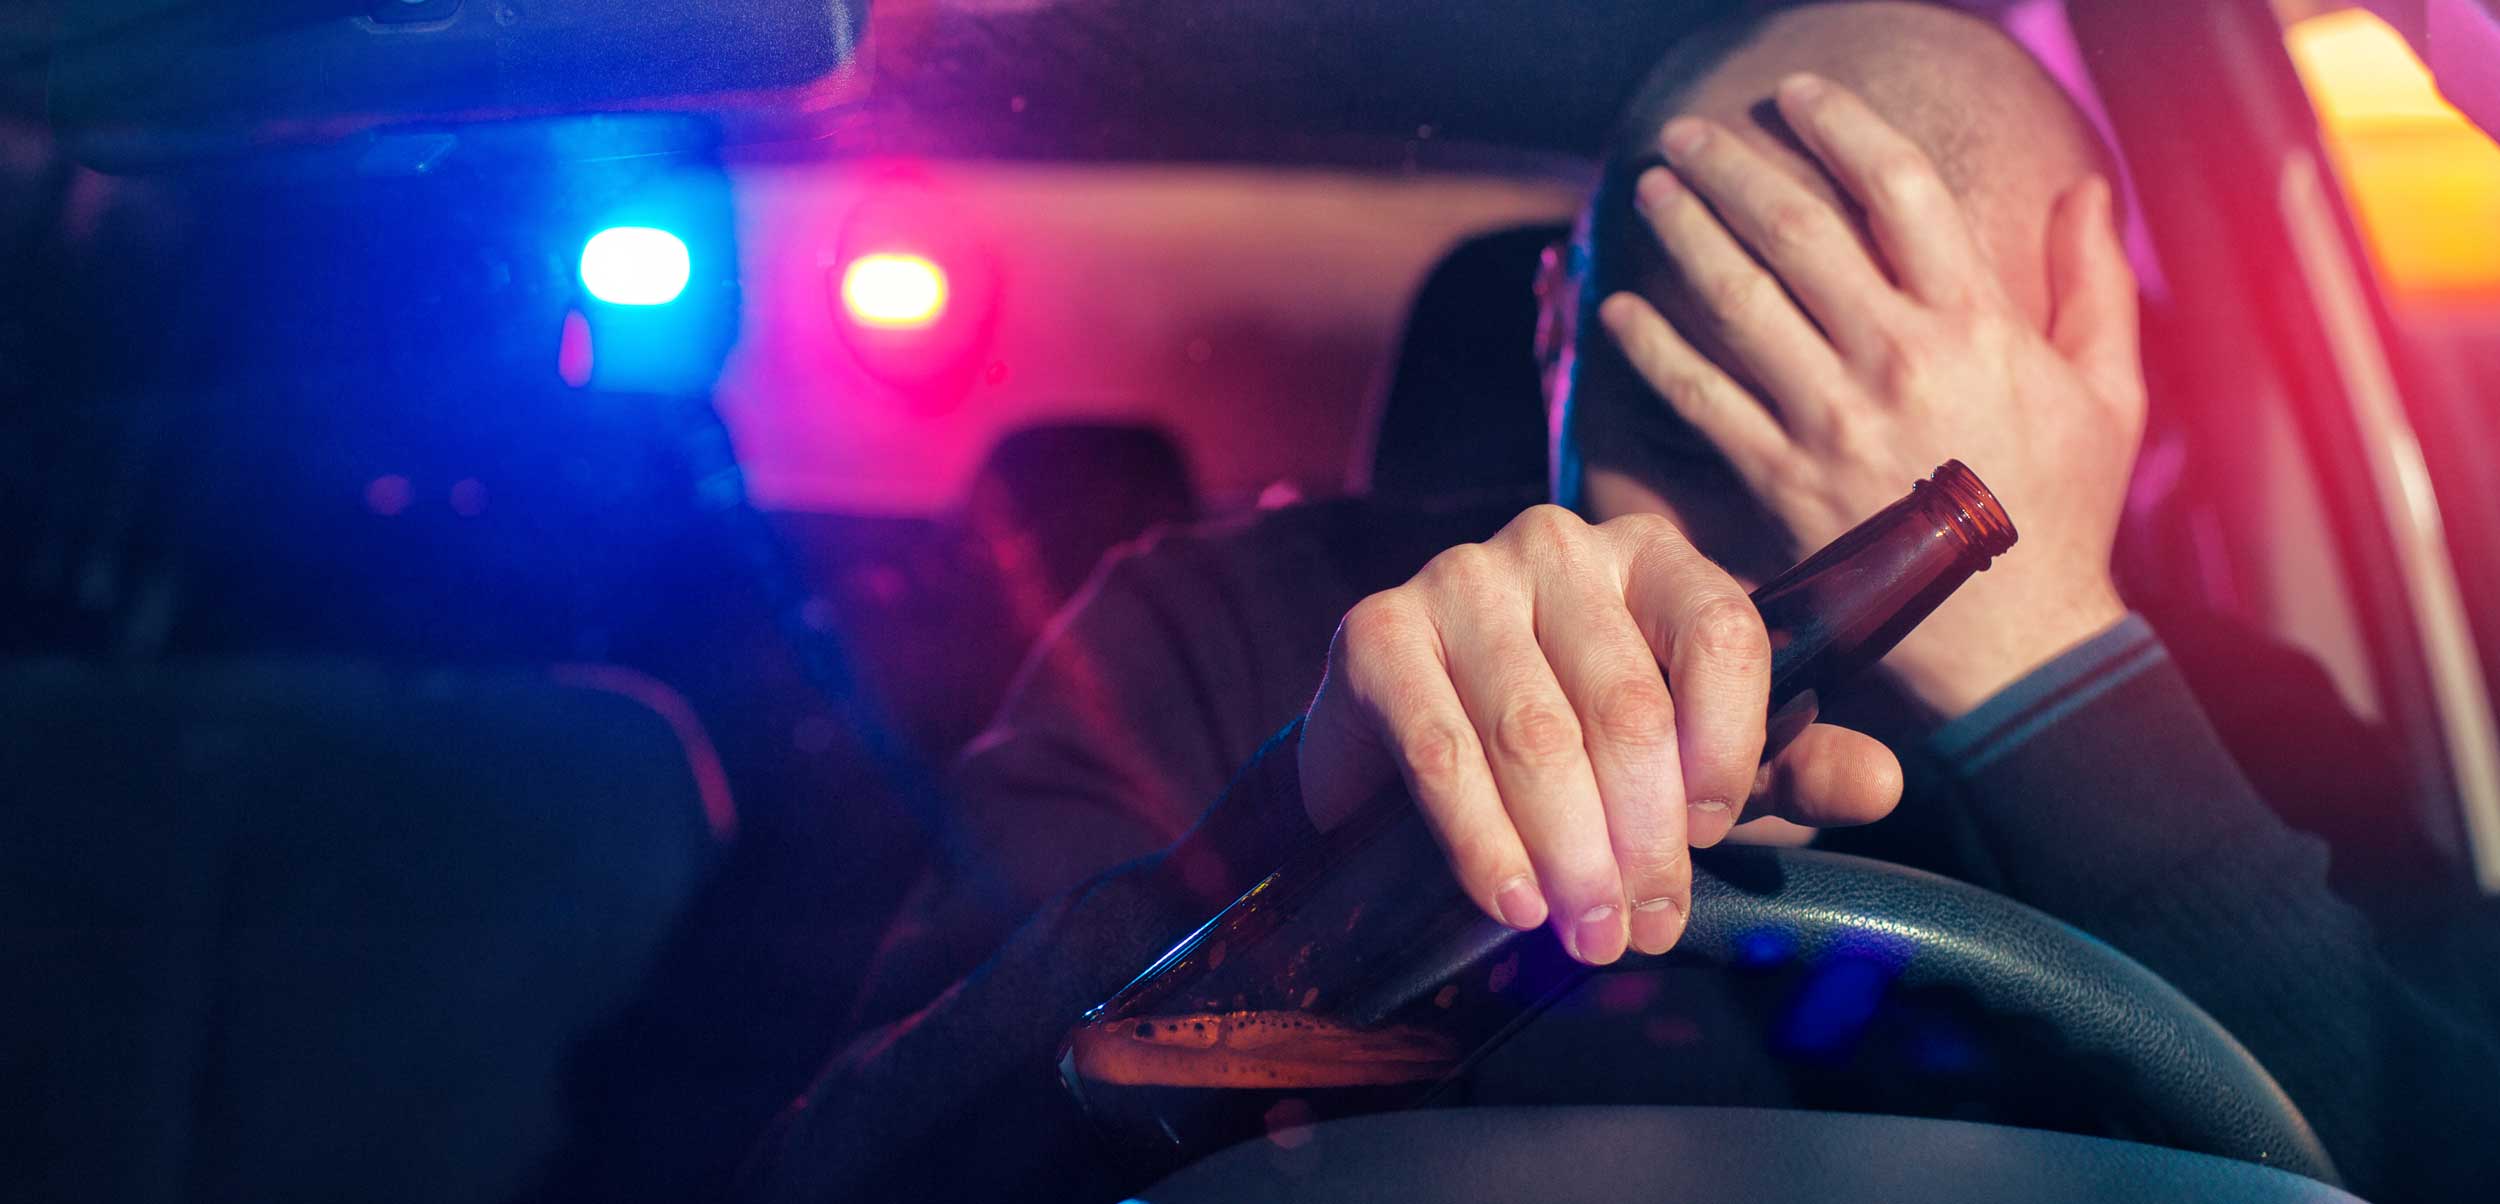 Drunk driver pulled over by cops with bottle in his hand